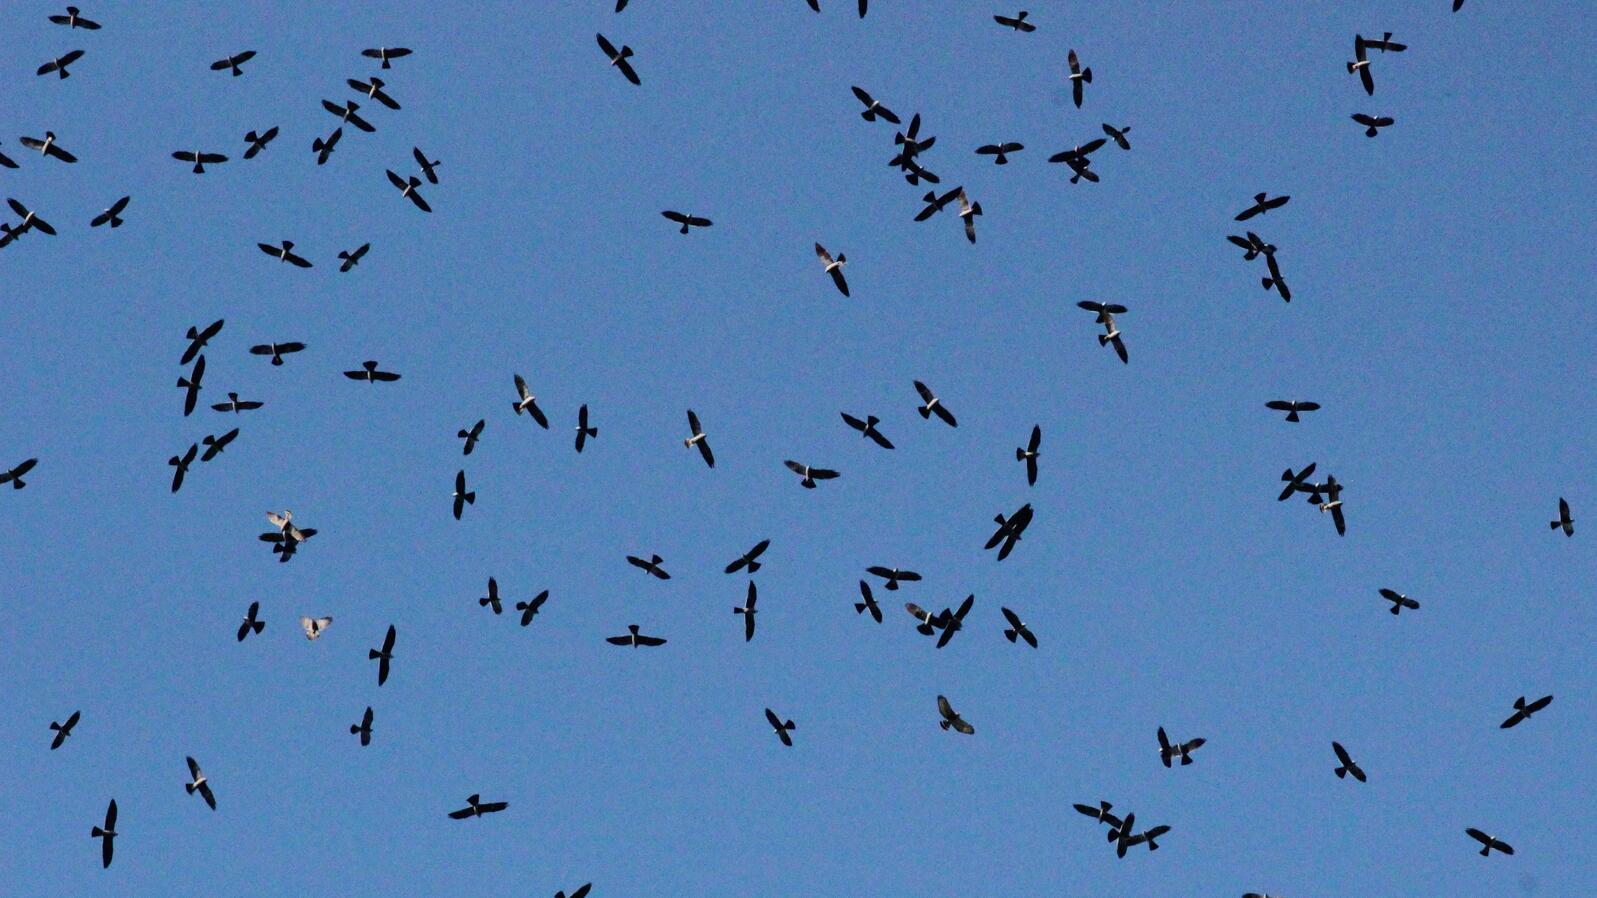 A kettle of hawks and kites.